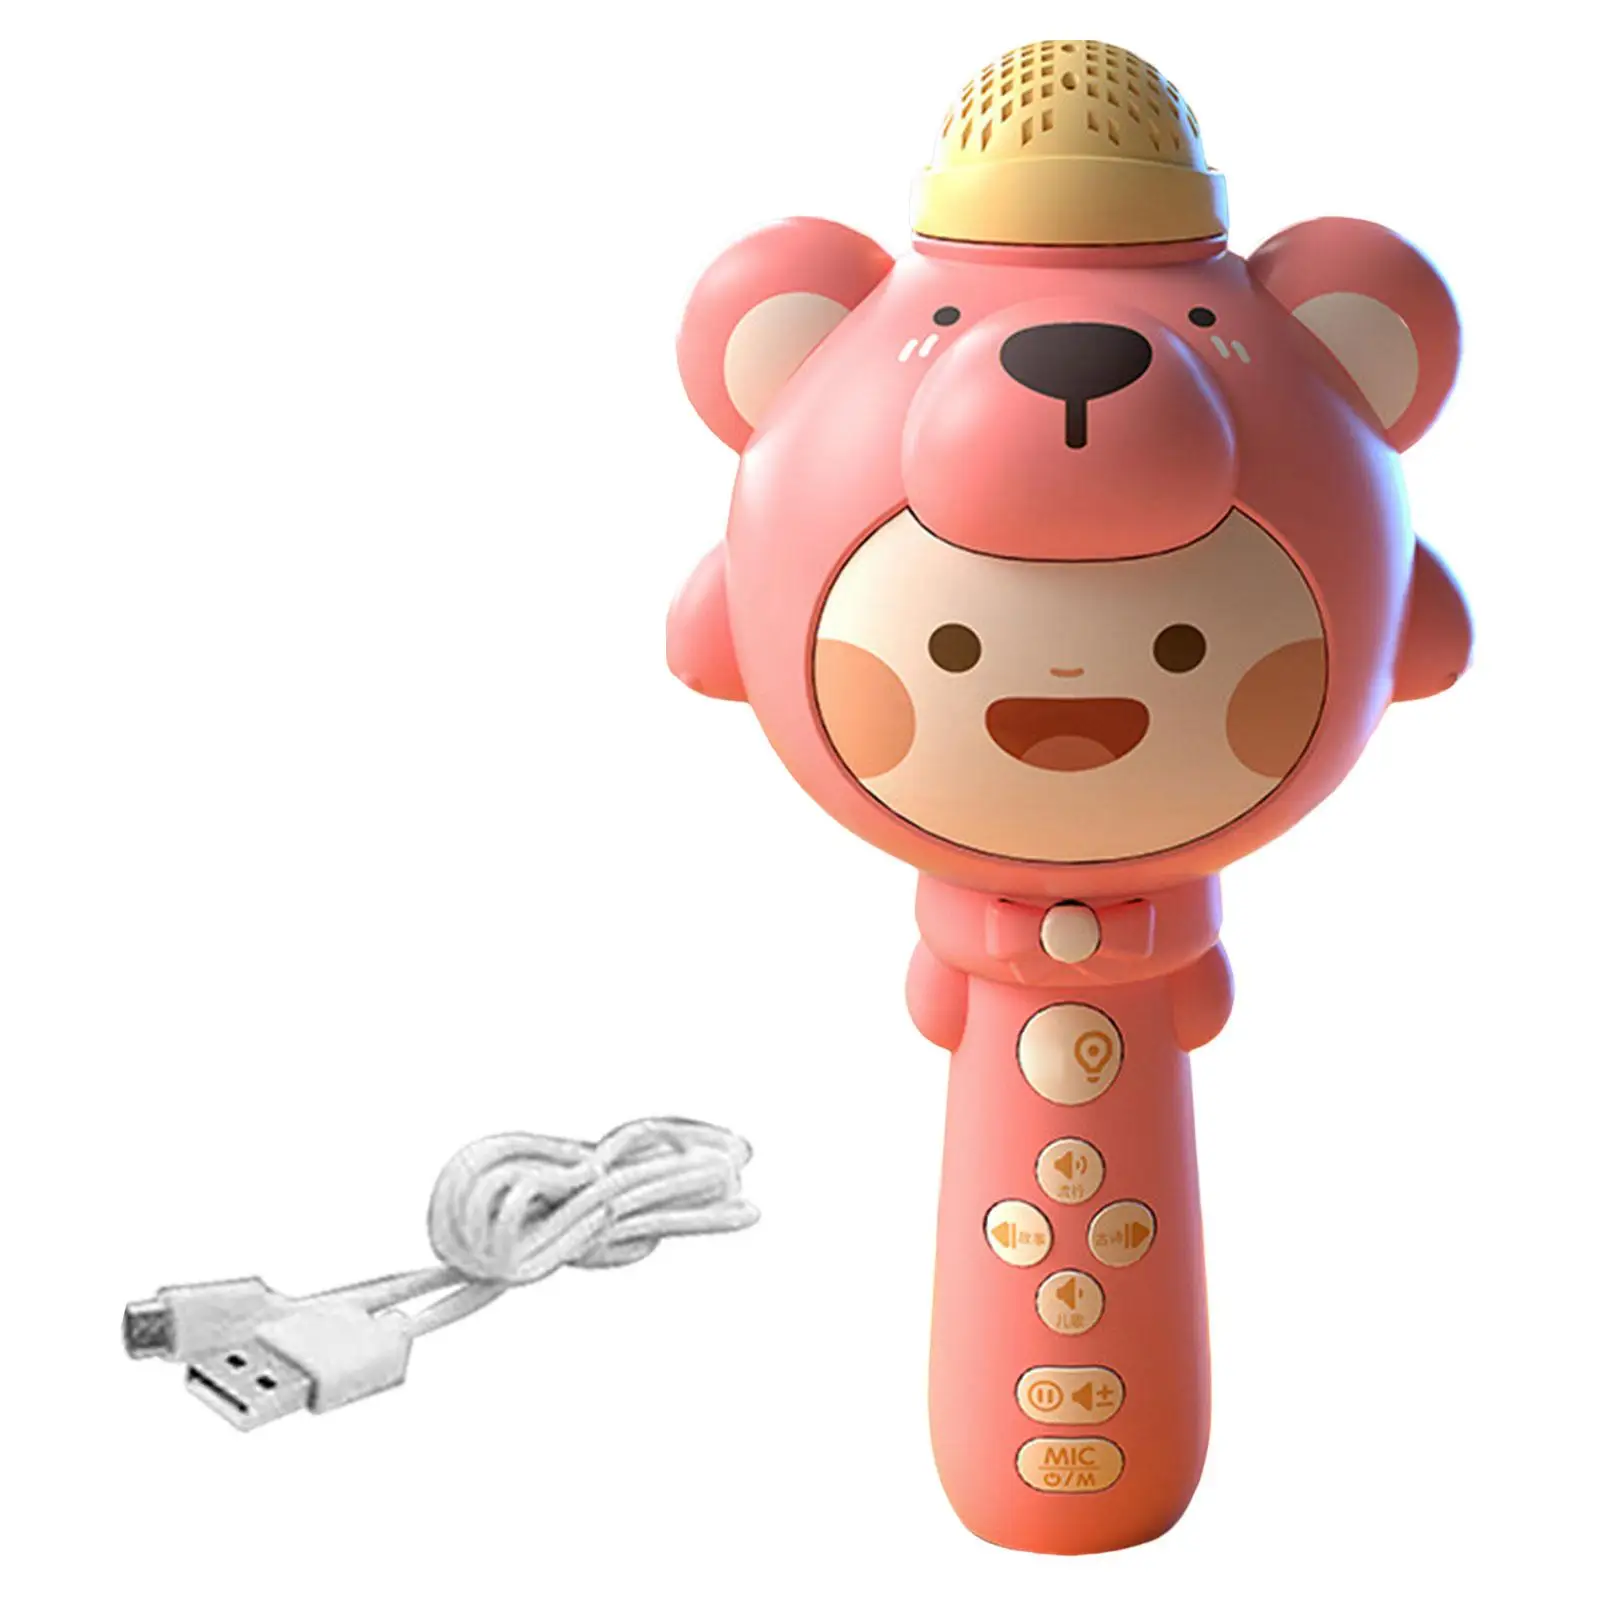 Handheld Mic Speaker Machine with LED Lights Kids Karaoke Microphone Machine Toy for Adults Birthday Girls Boys Toy Great Gifts